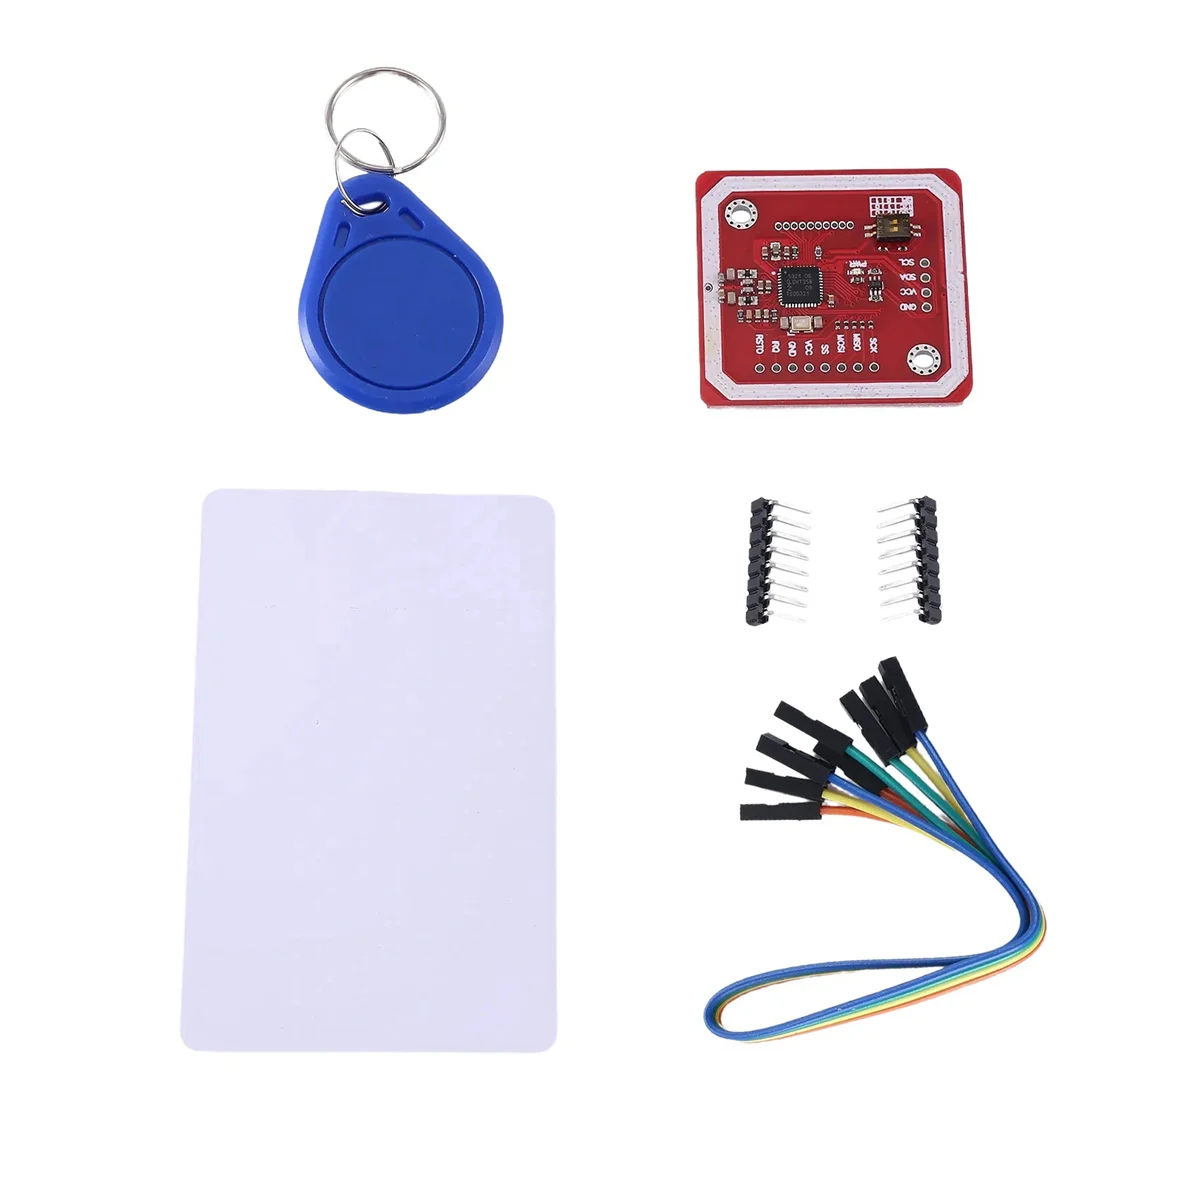 

PN532 NFC RFID V3 Module Near Field Communication Support and Android Phone Communication